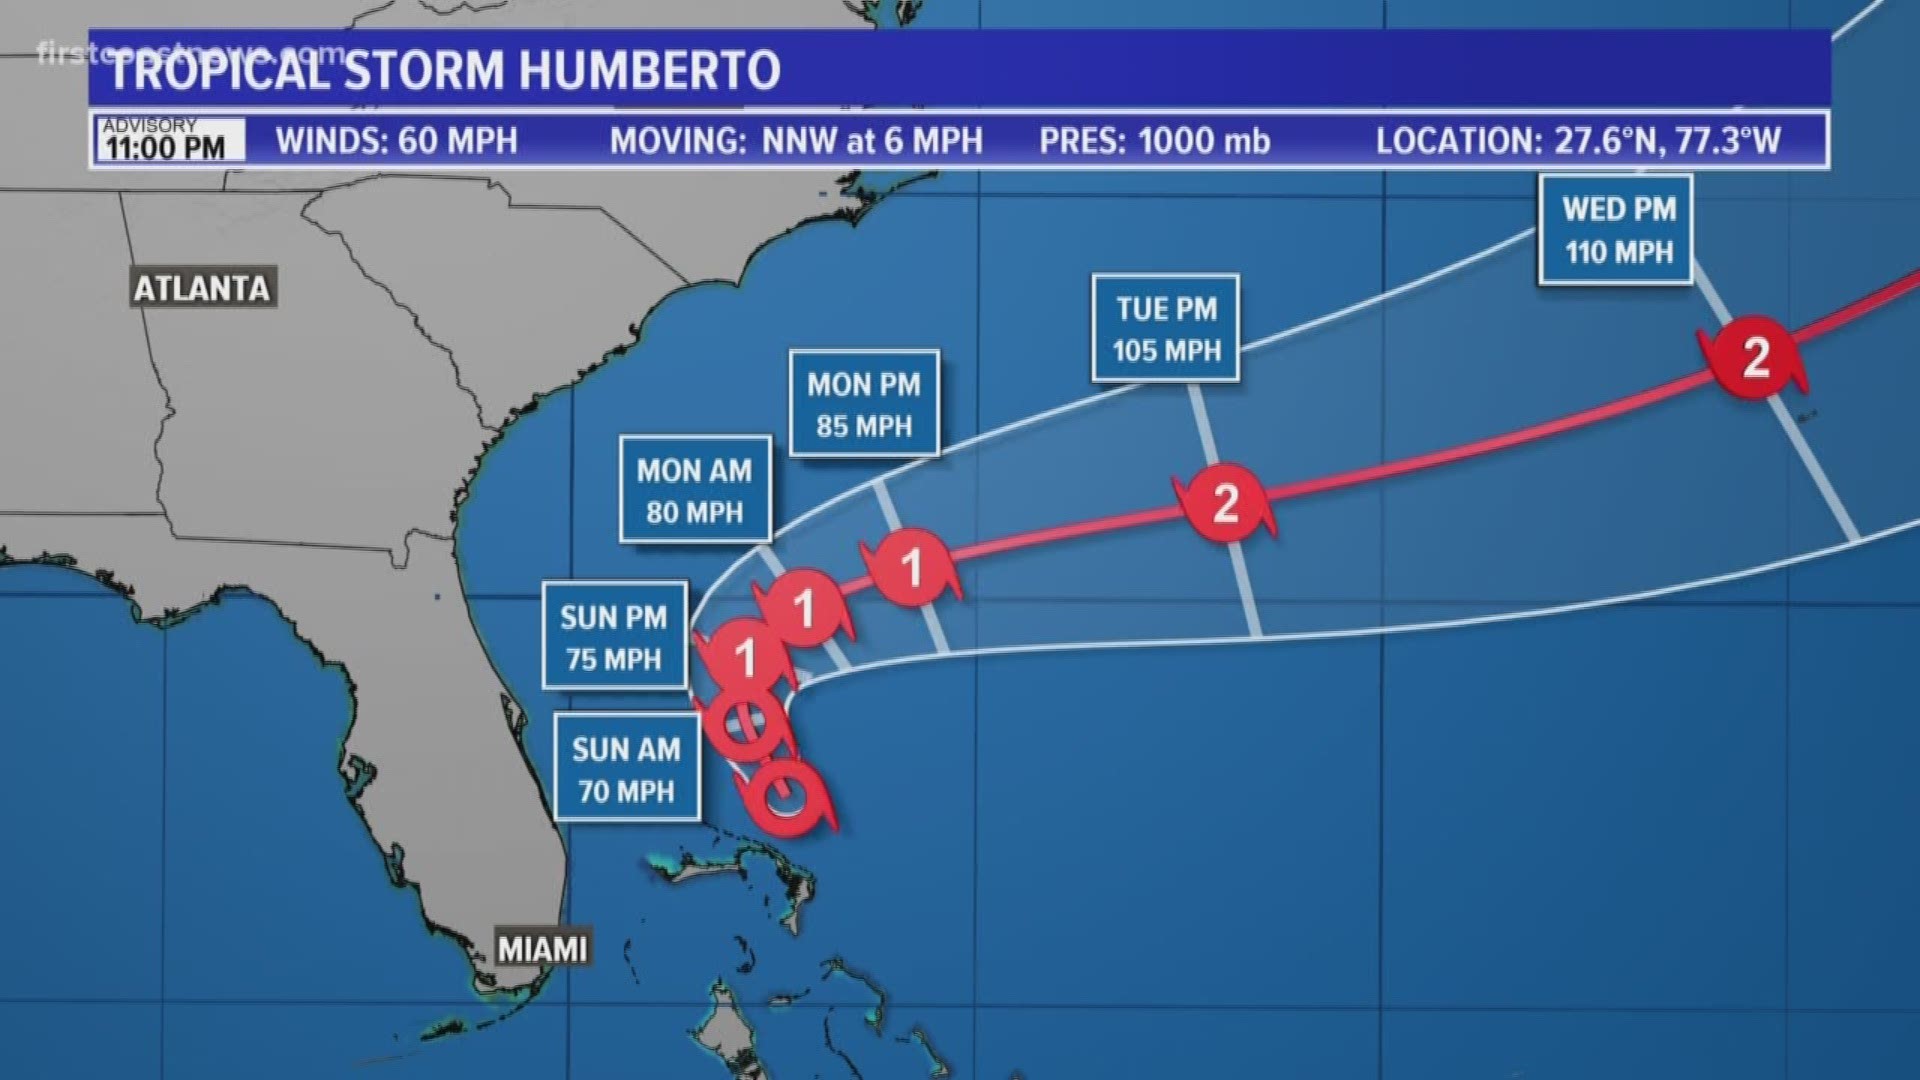 11 P.M. ADVISORY -- Humberto is slowly strengthening to the north of the Bahamas. It's expected to become a hurricane on Sunday.